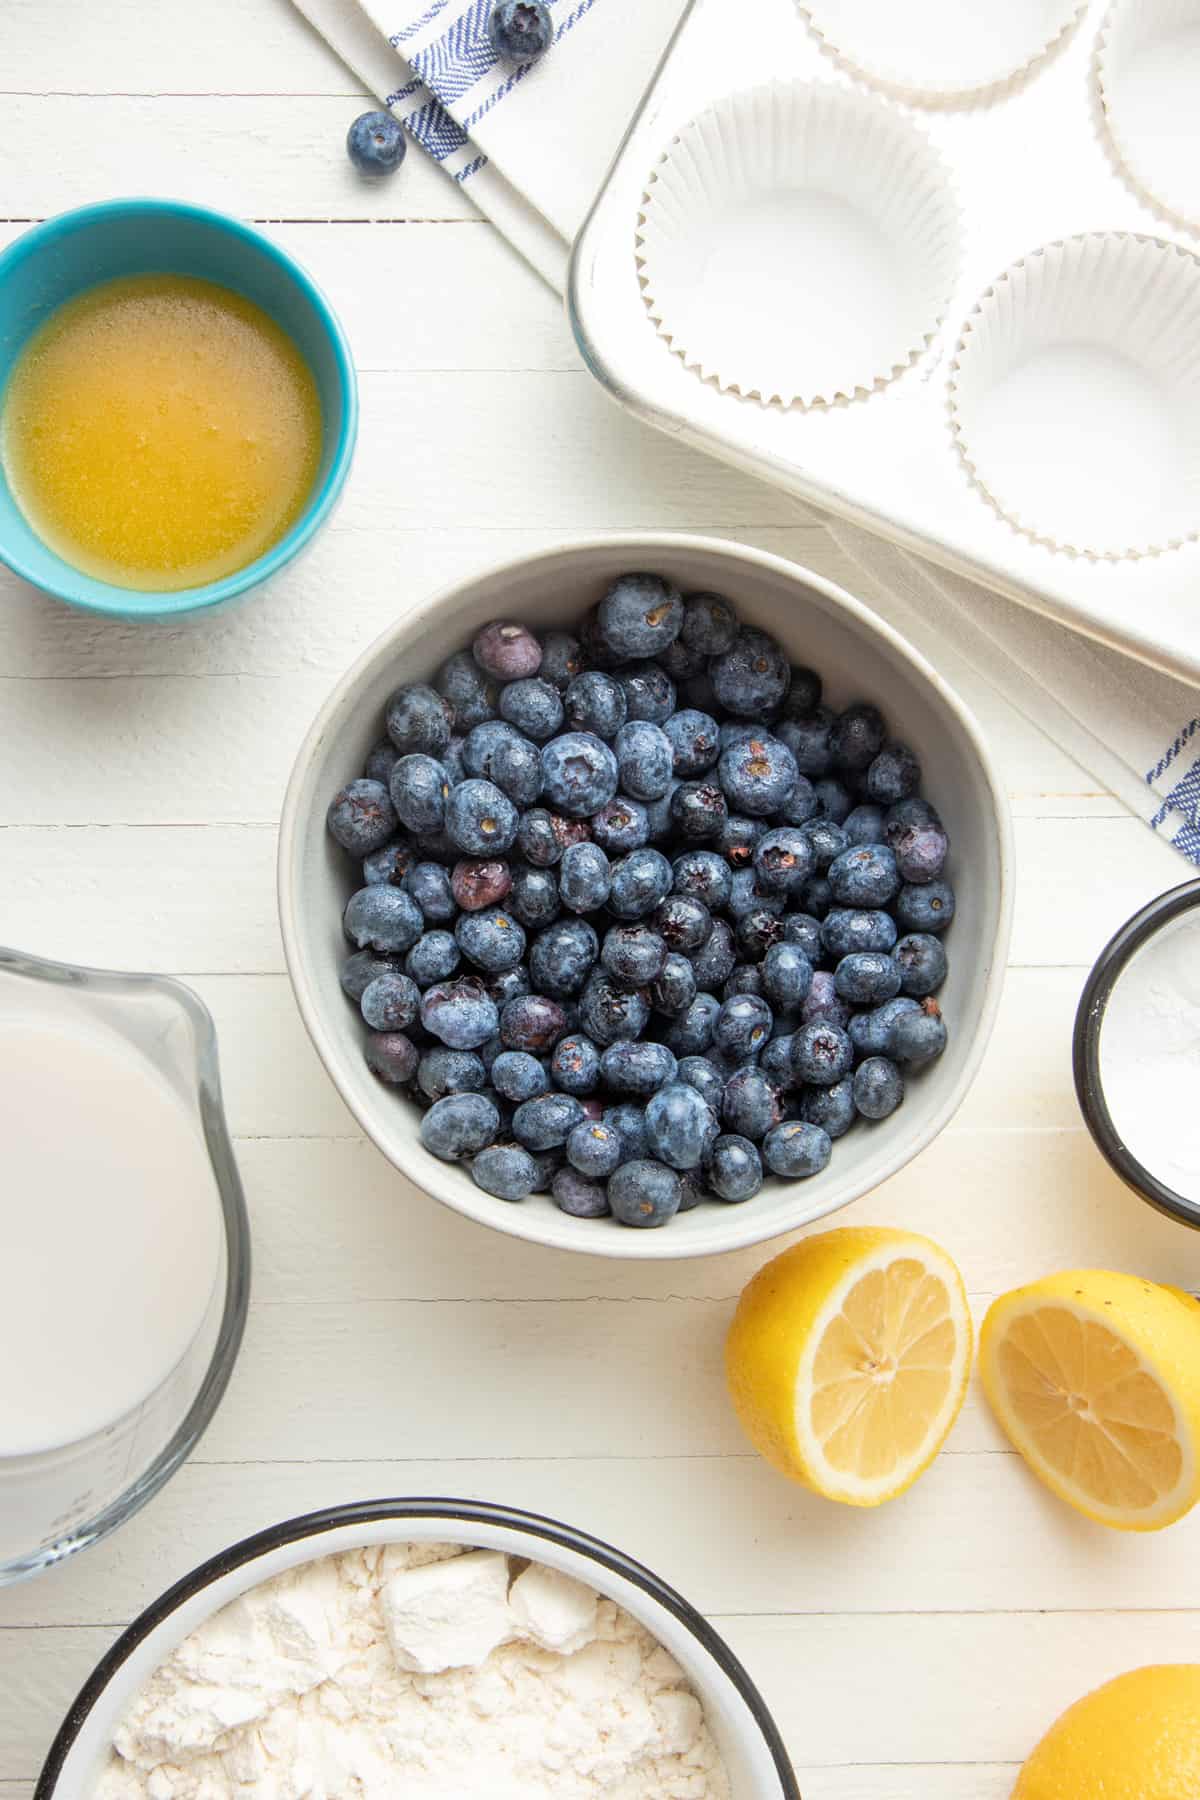 Blueberries sit in a bowl. A muffin pan, lemon slices, and other ingredients sit to the side.